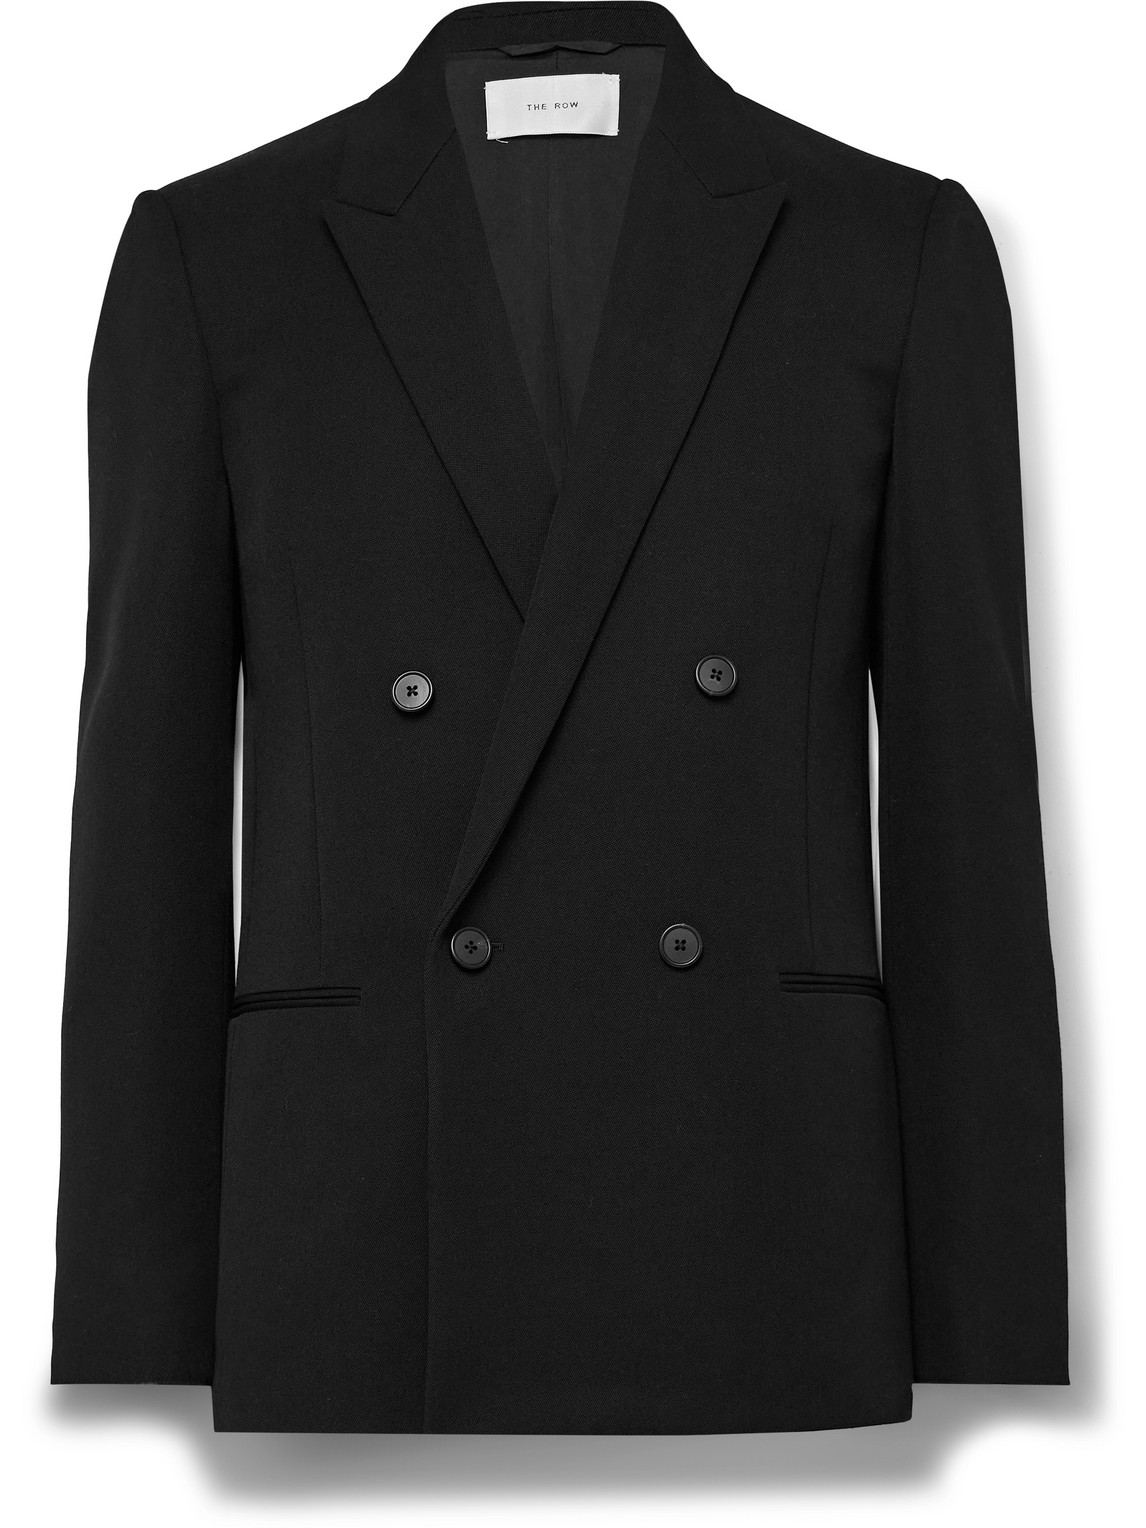 THE ROW WILSON DOUBLE-BREASTED WOOL SUIT JACKET